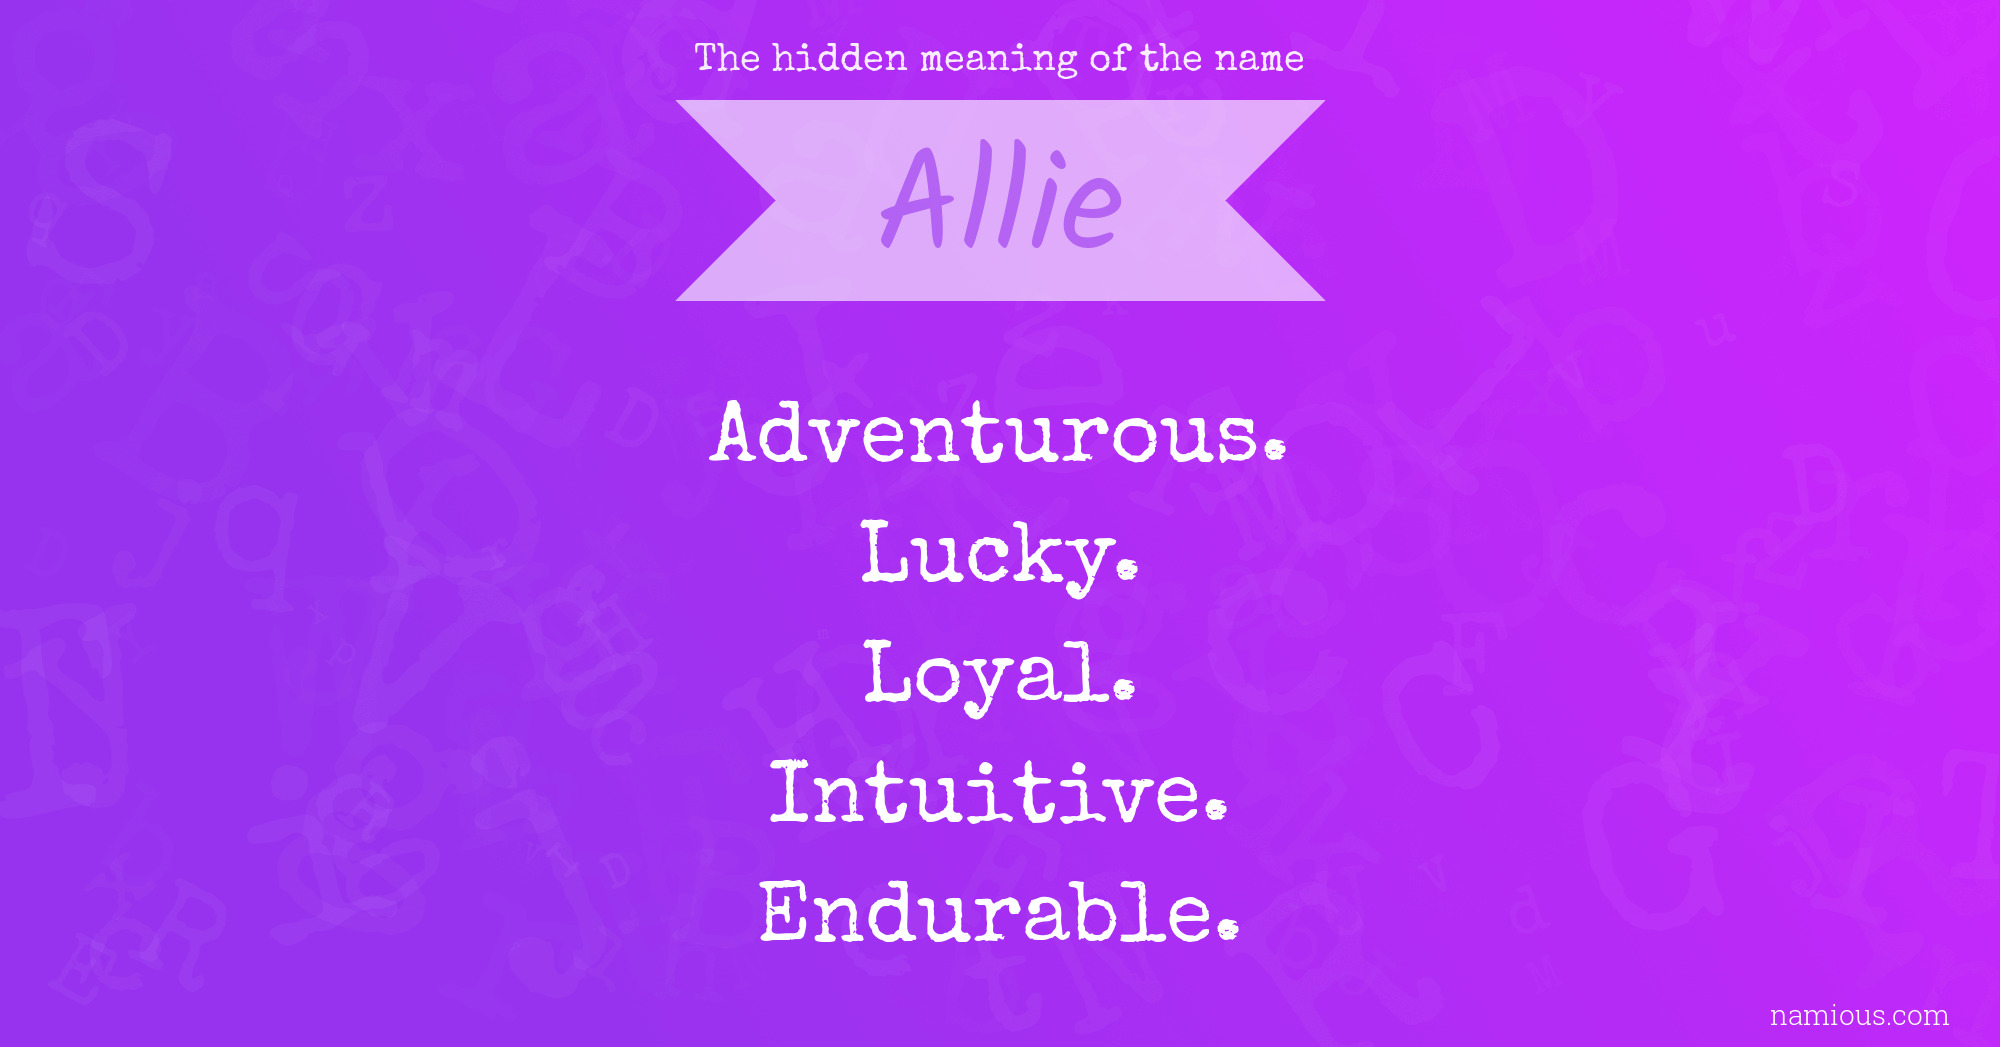 The hidden meaning of the name Allie